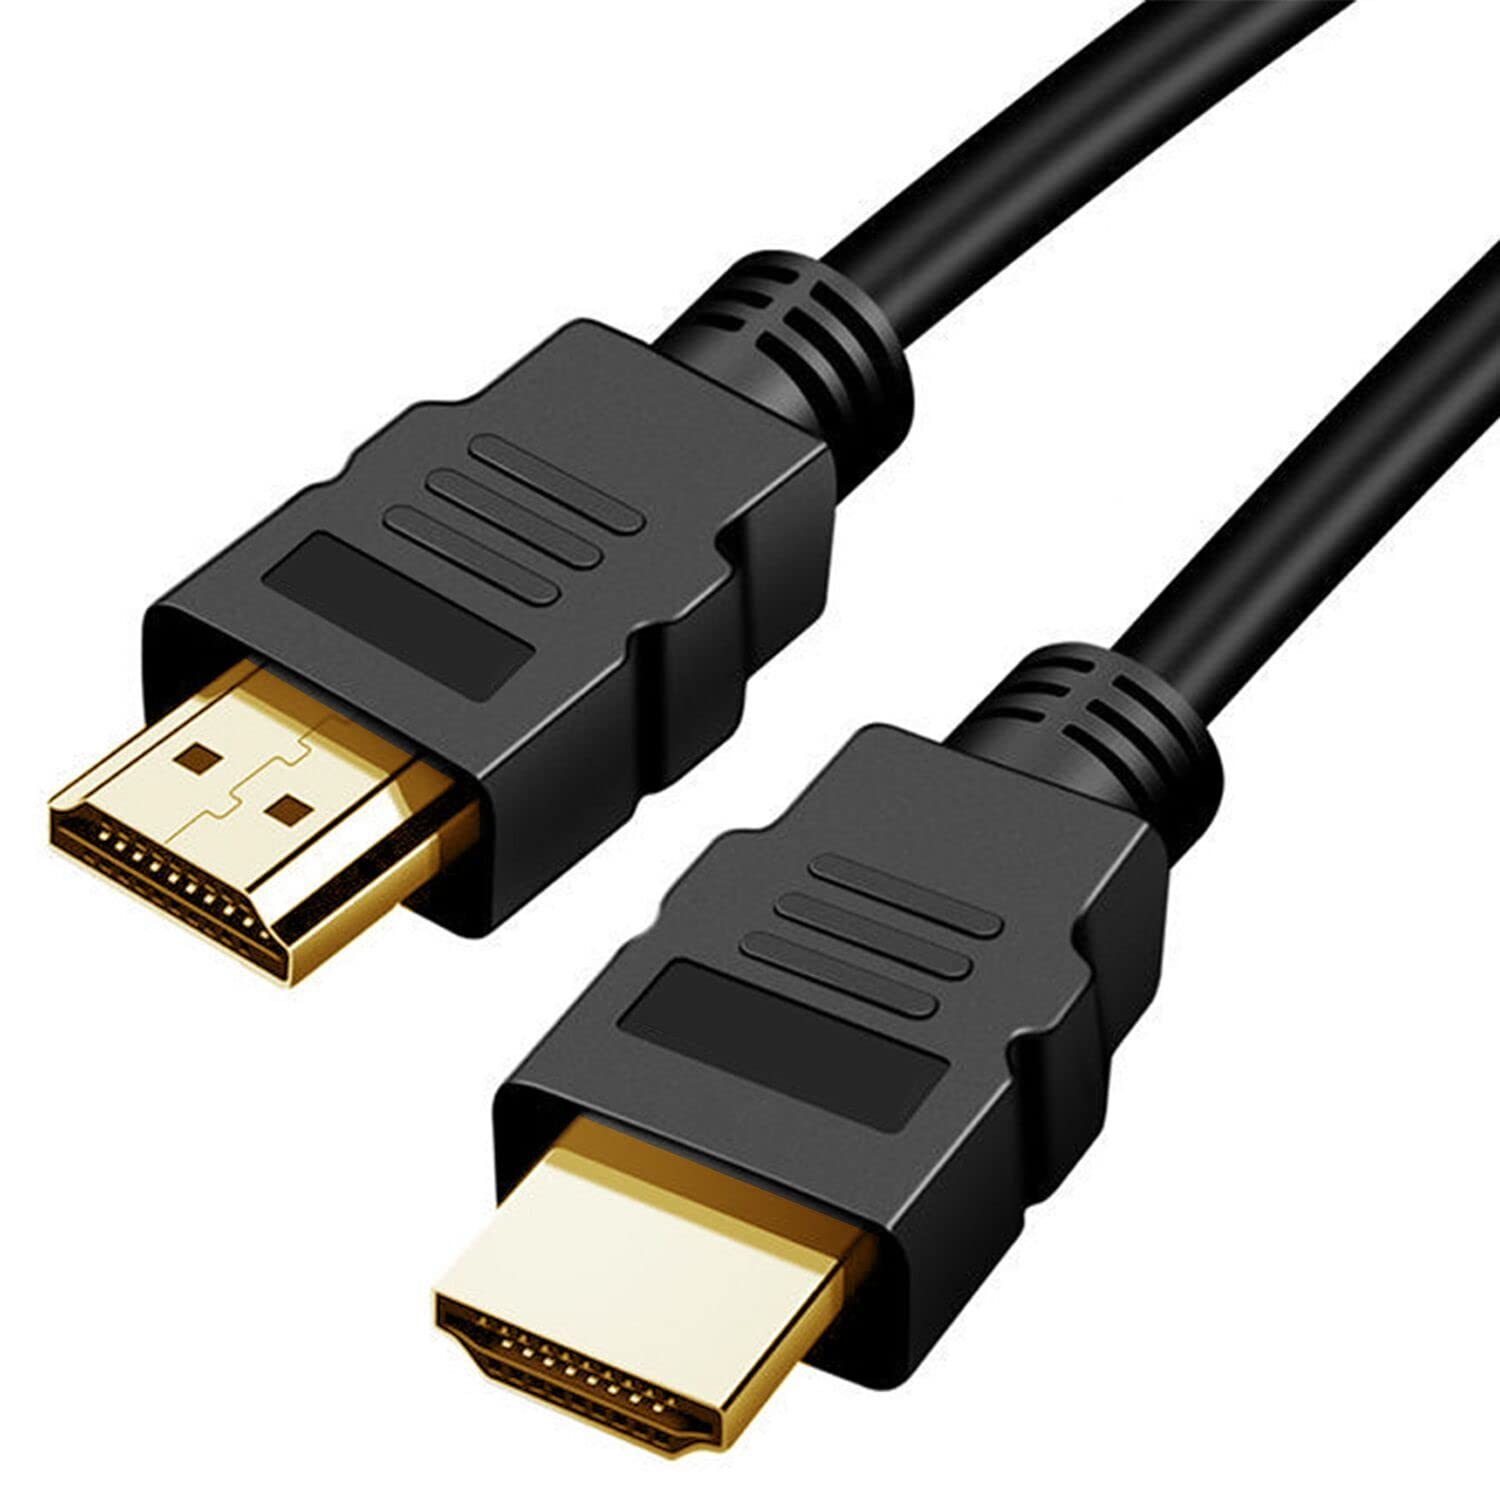 Ankky HDMI Cable (18 Gbps, 4K/60Hz), 6 Feet HDMI to [...]